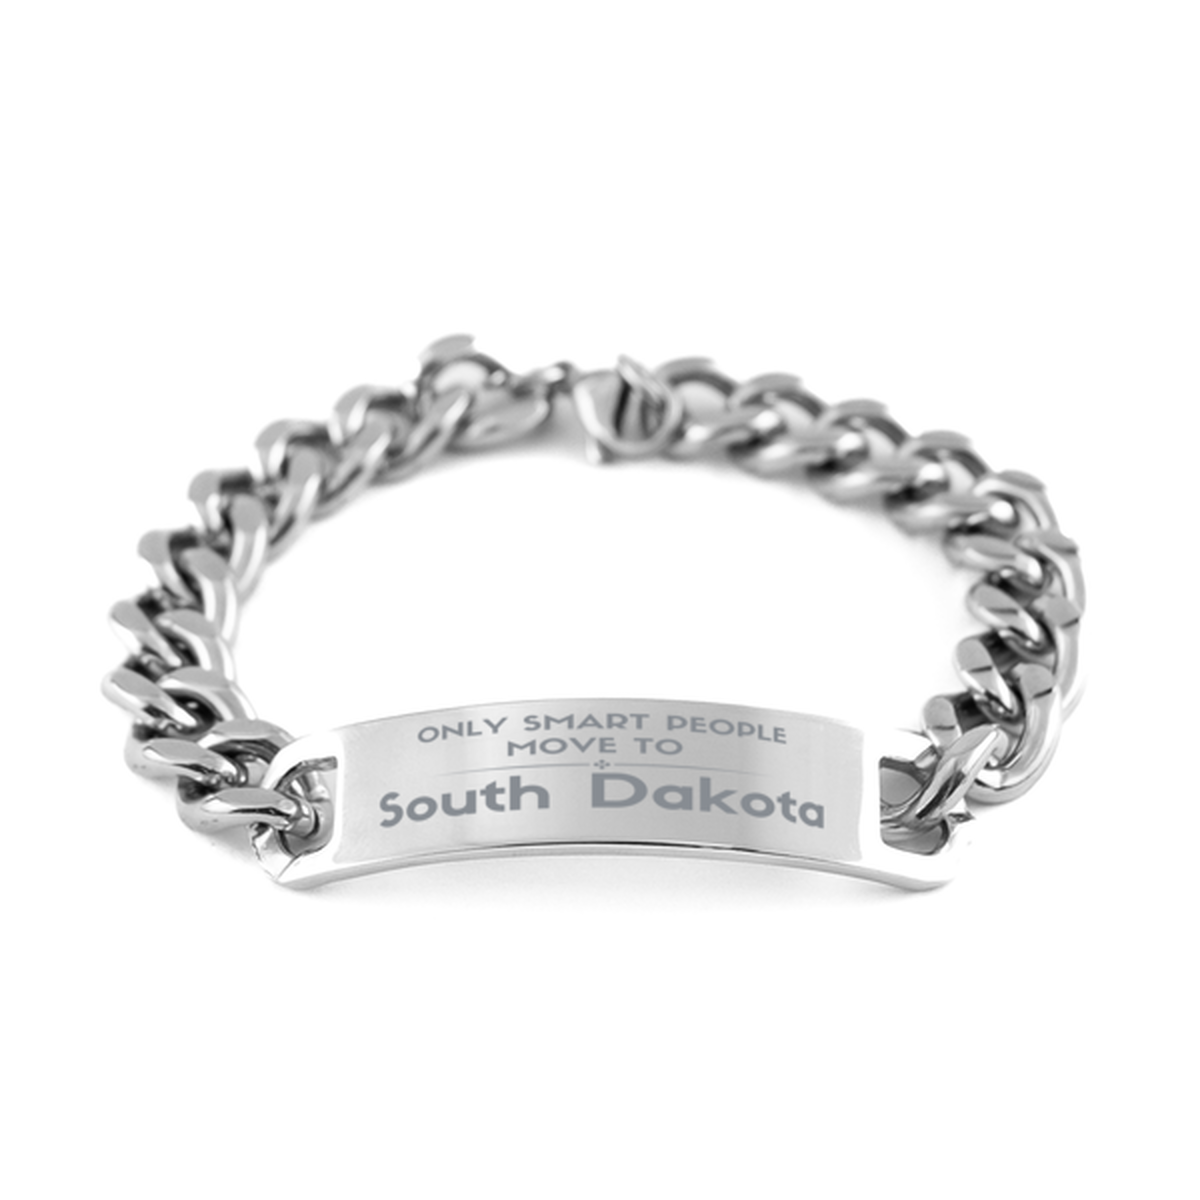 Only smart people move to South Dakota Cuban Chain Stainless Steel Bracelet, Gag Gifts For South Dakota, Move to South Dakota Gifts for Friends Coworker Funny Saying Quote